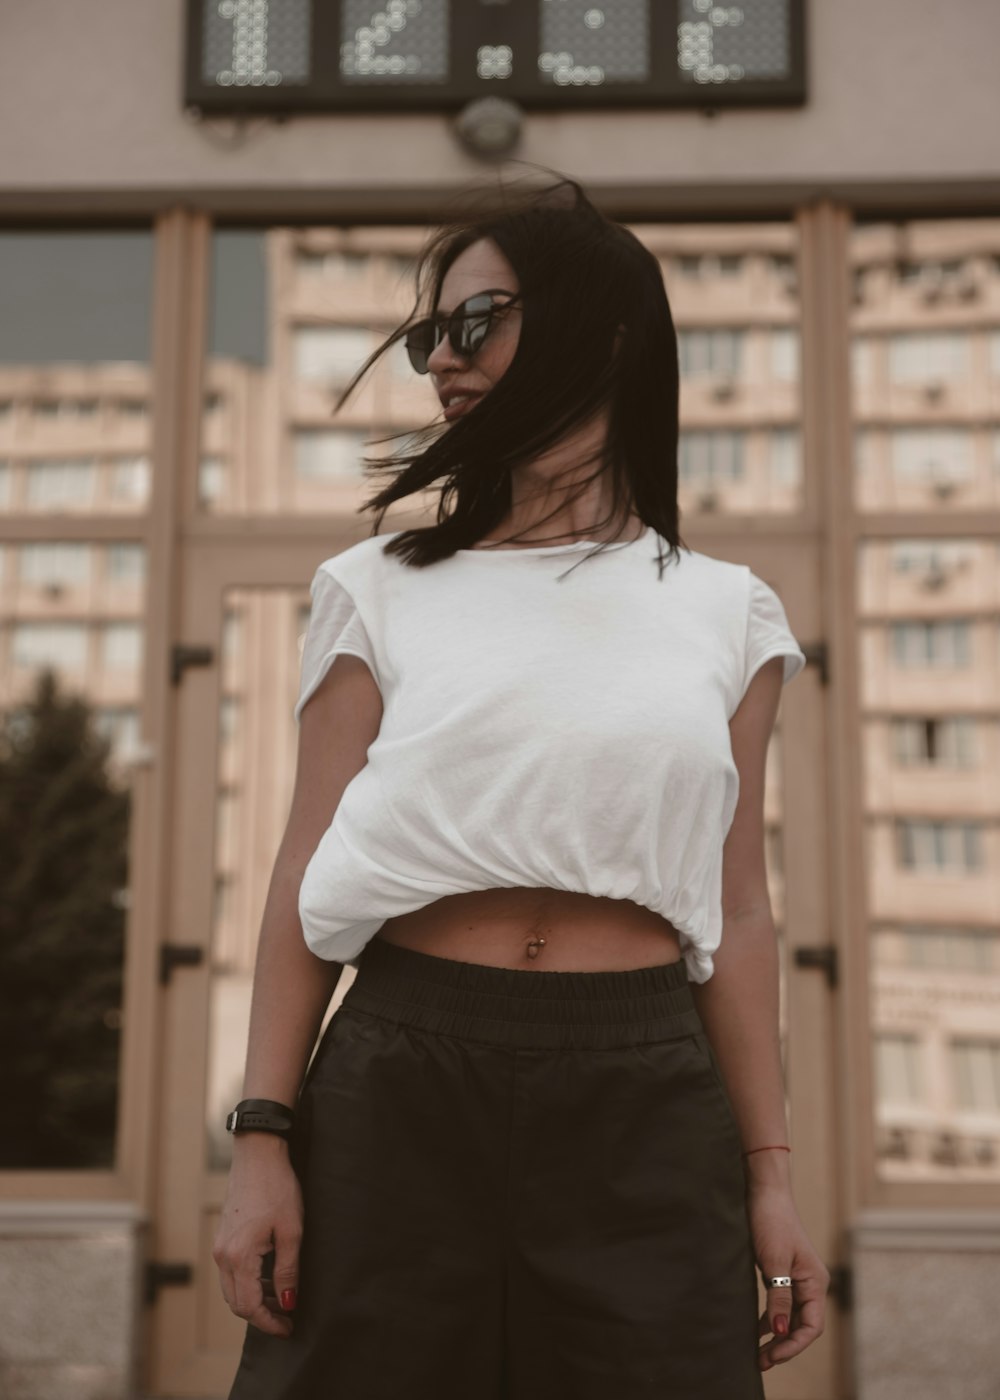 woman wearing white blouse and sunglasses standing while glancing her right side